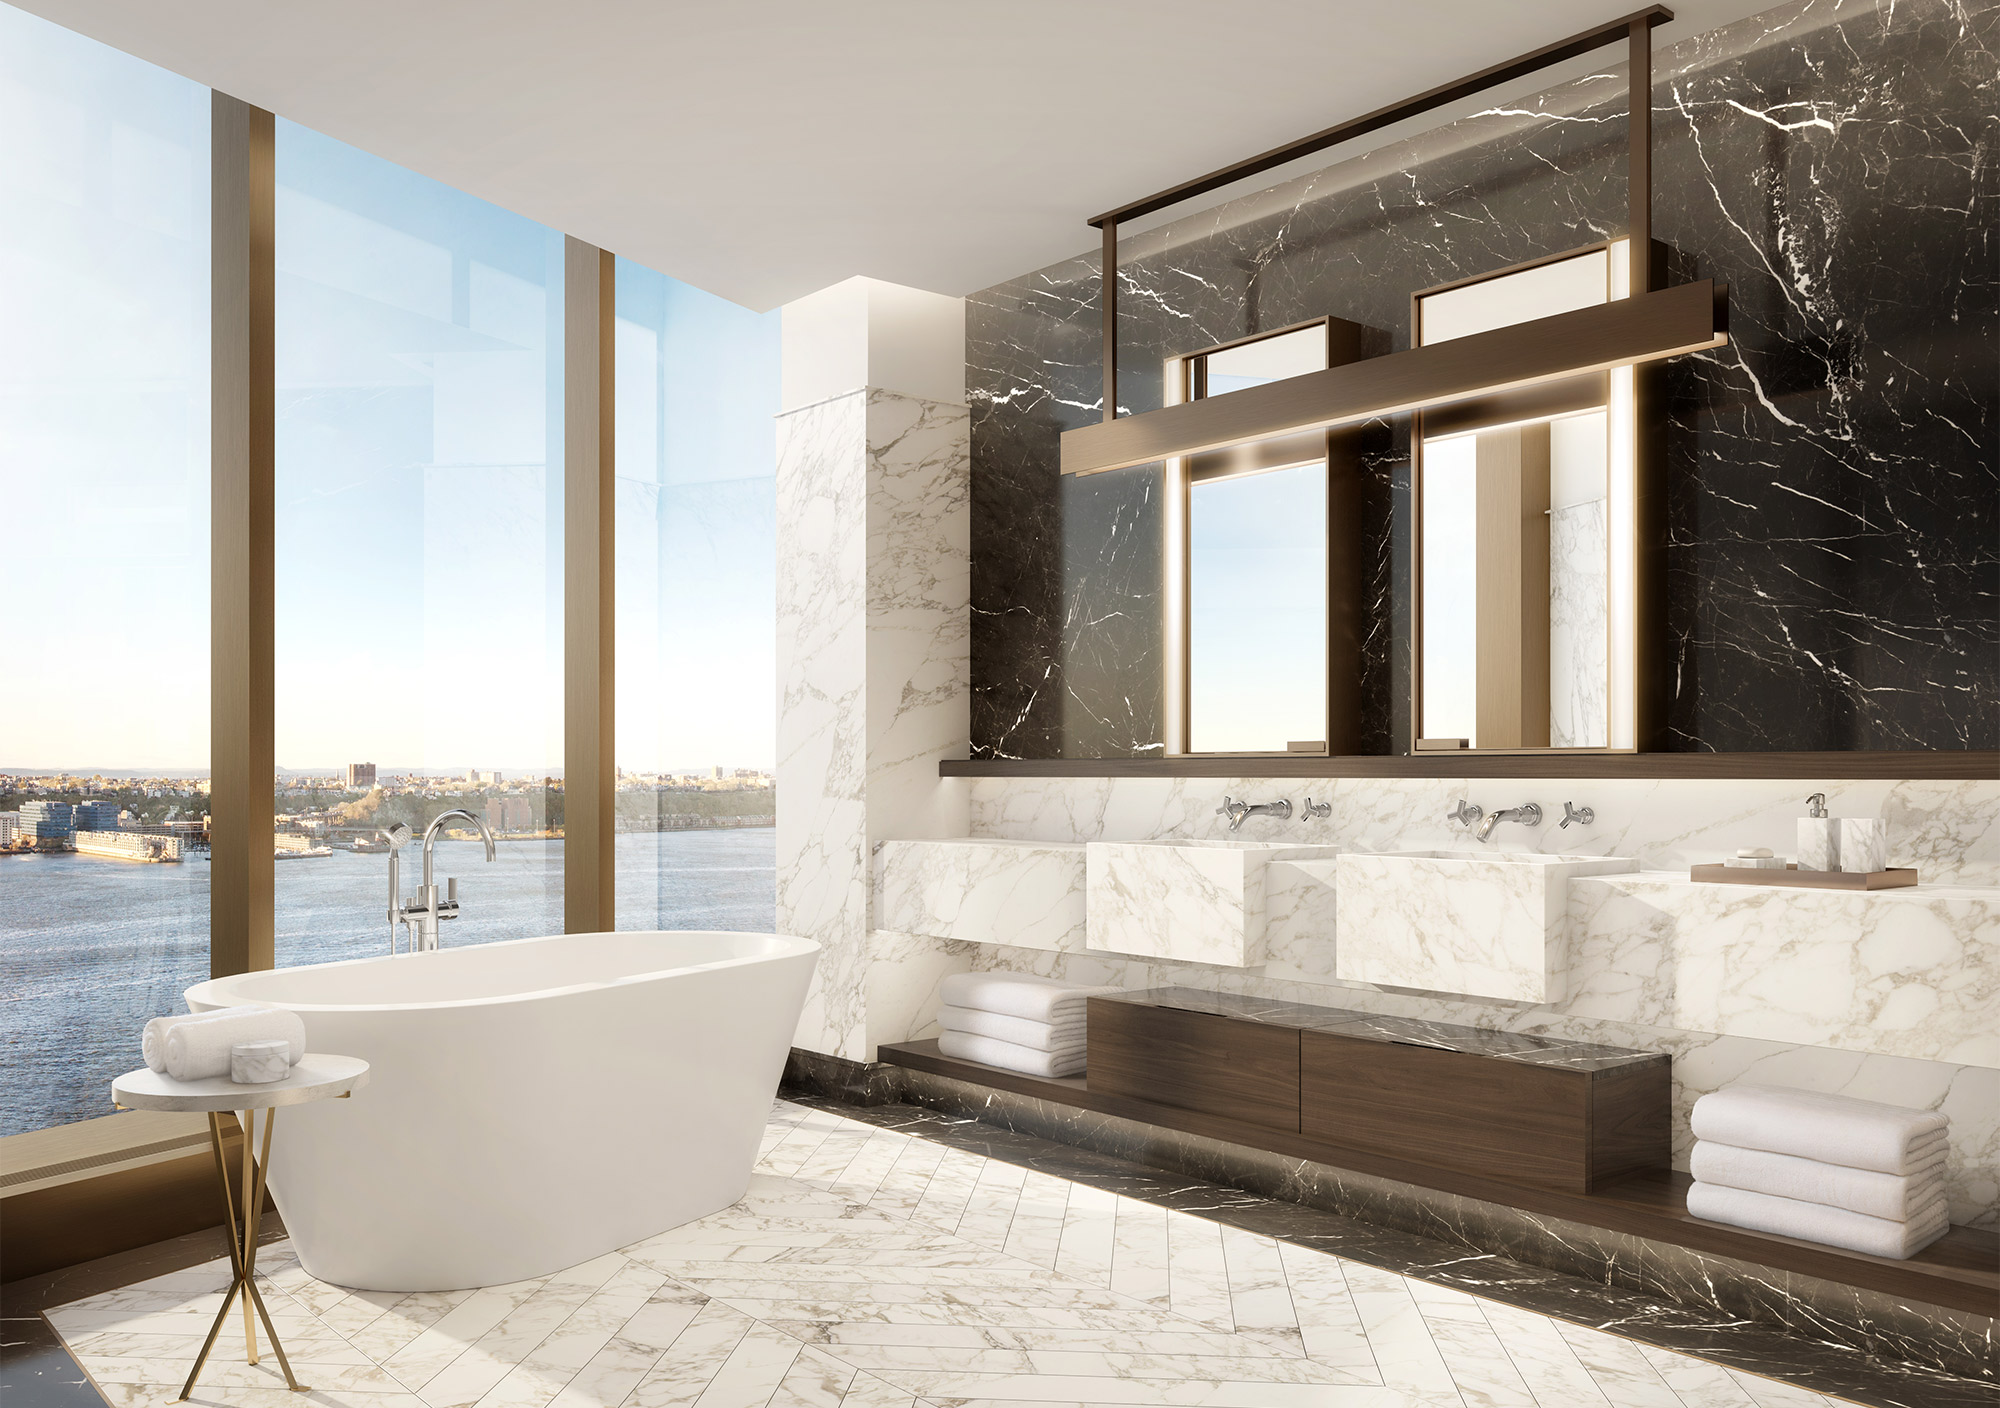 Large marble bathroom with bathtub overlooking the Hudson River